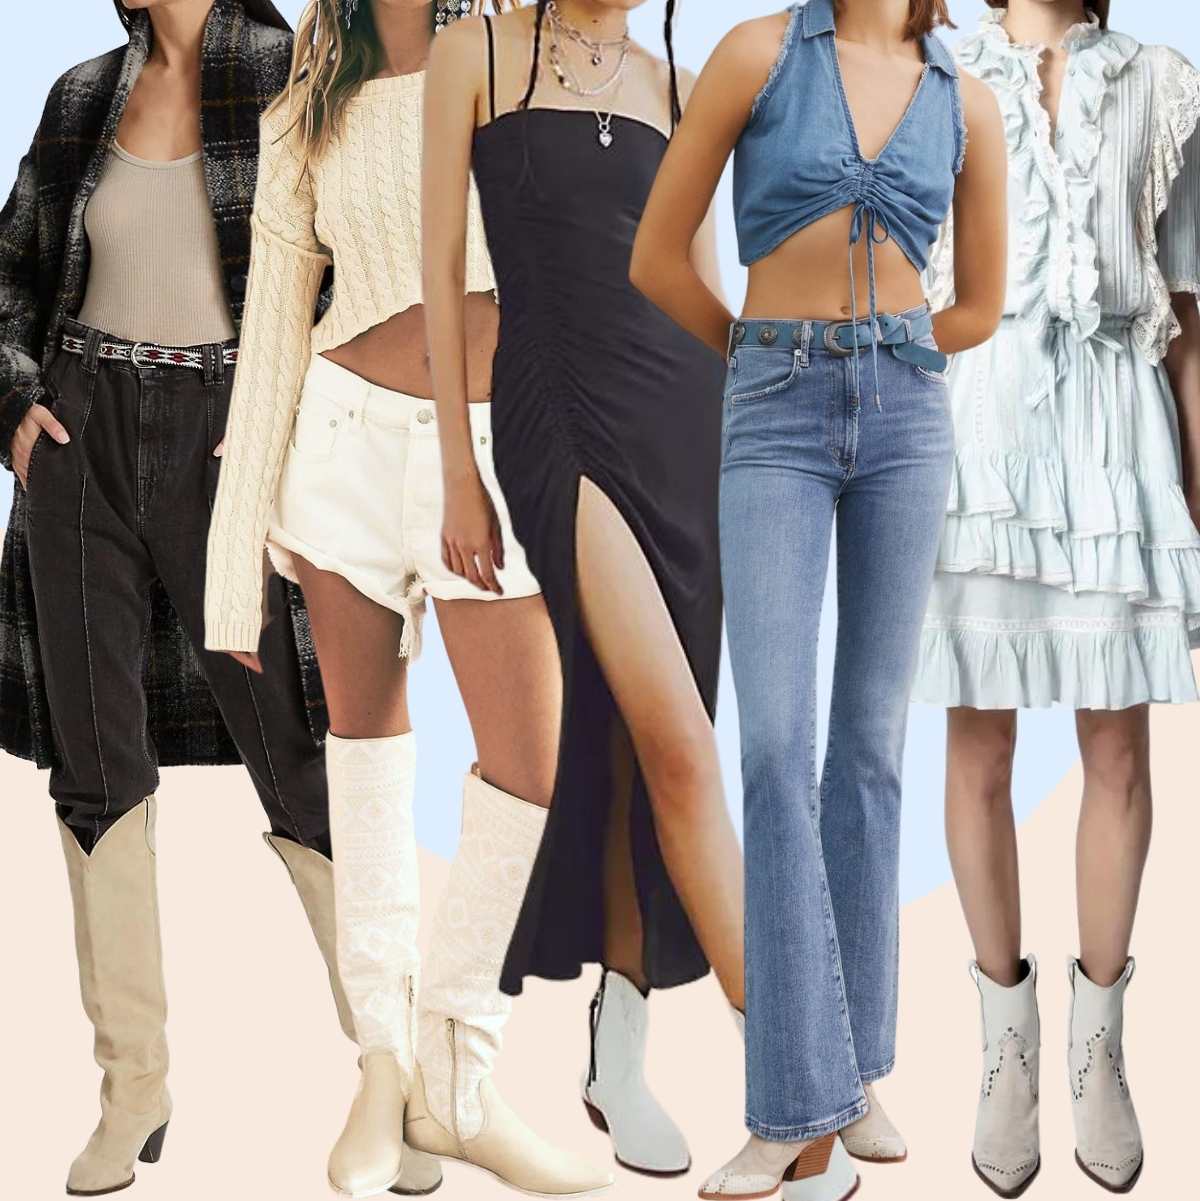 Collage of 5 women wearing different western white boots outfits.